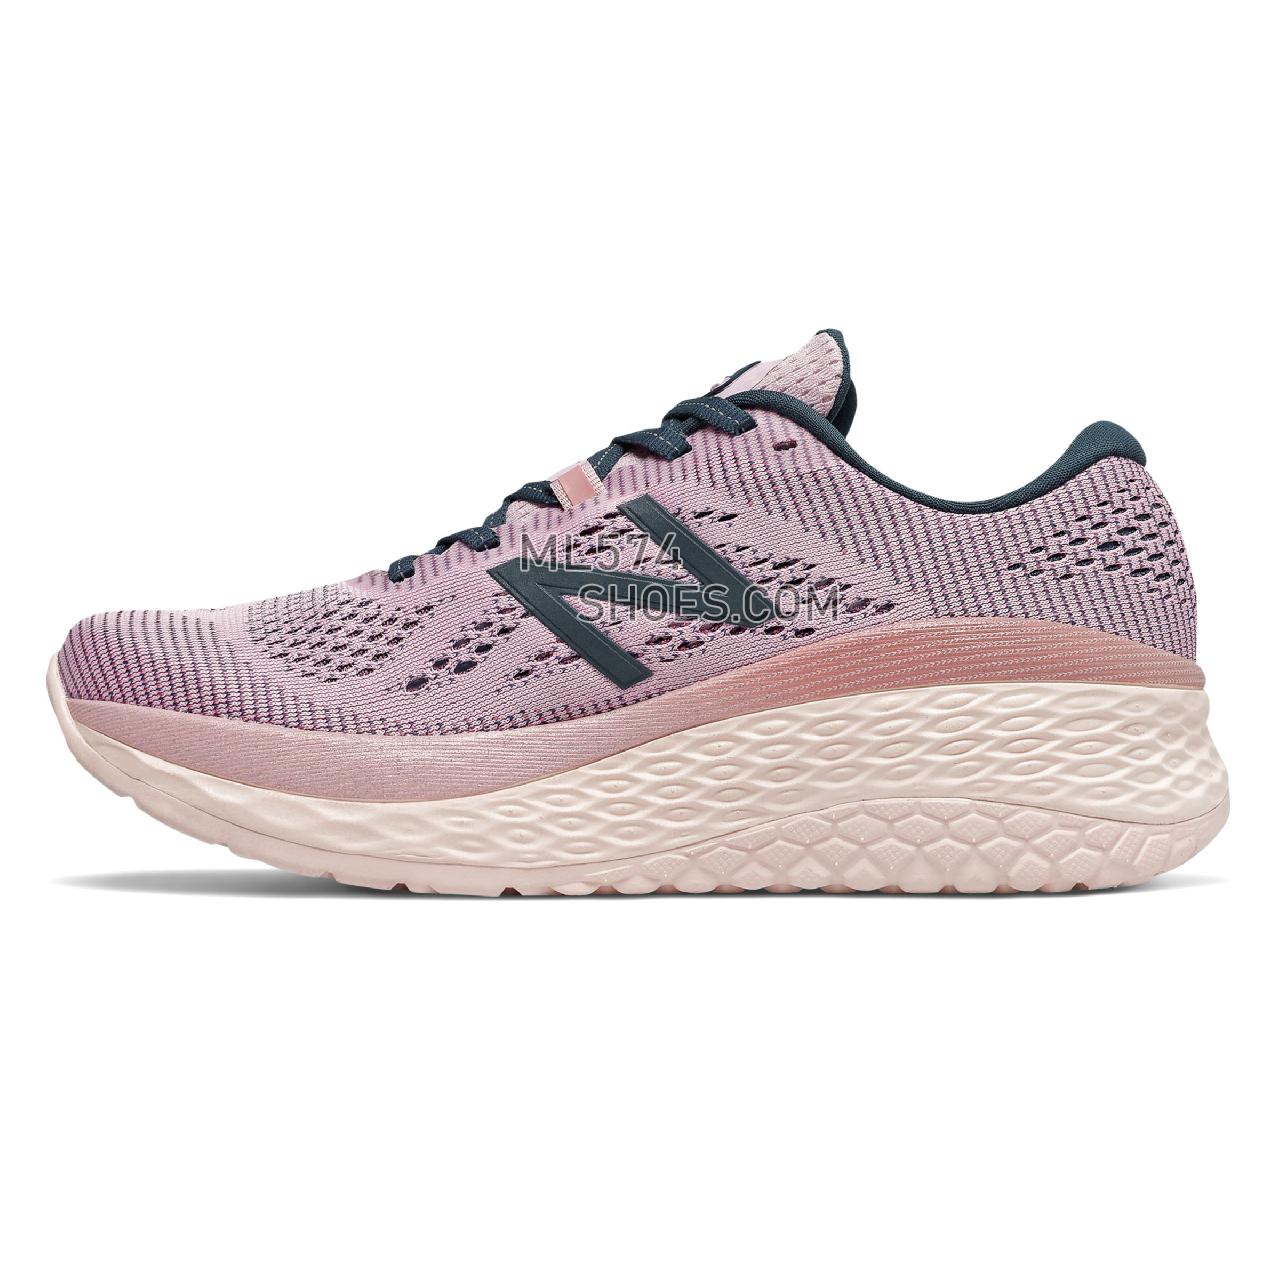 New Balance Fresh Foam More - Women's Neutral Running - Twilight Rose with Supercell and Oxygen Pink - WMORSO